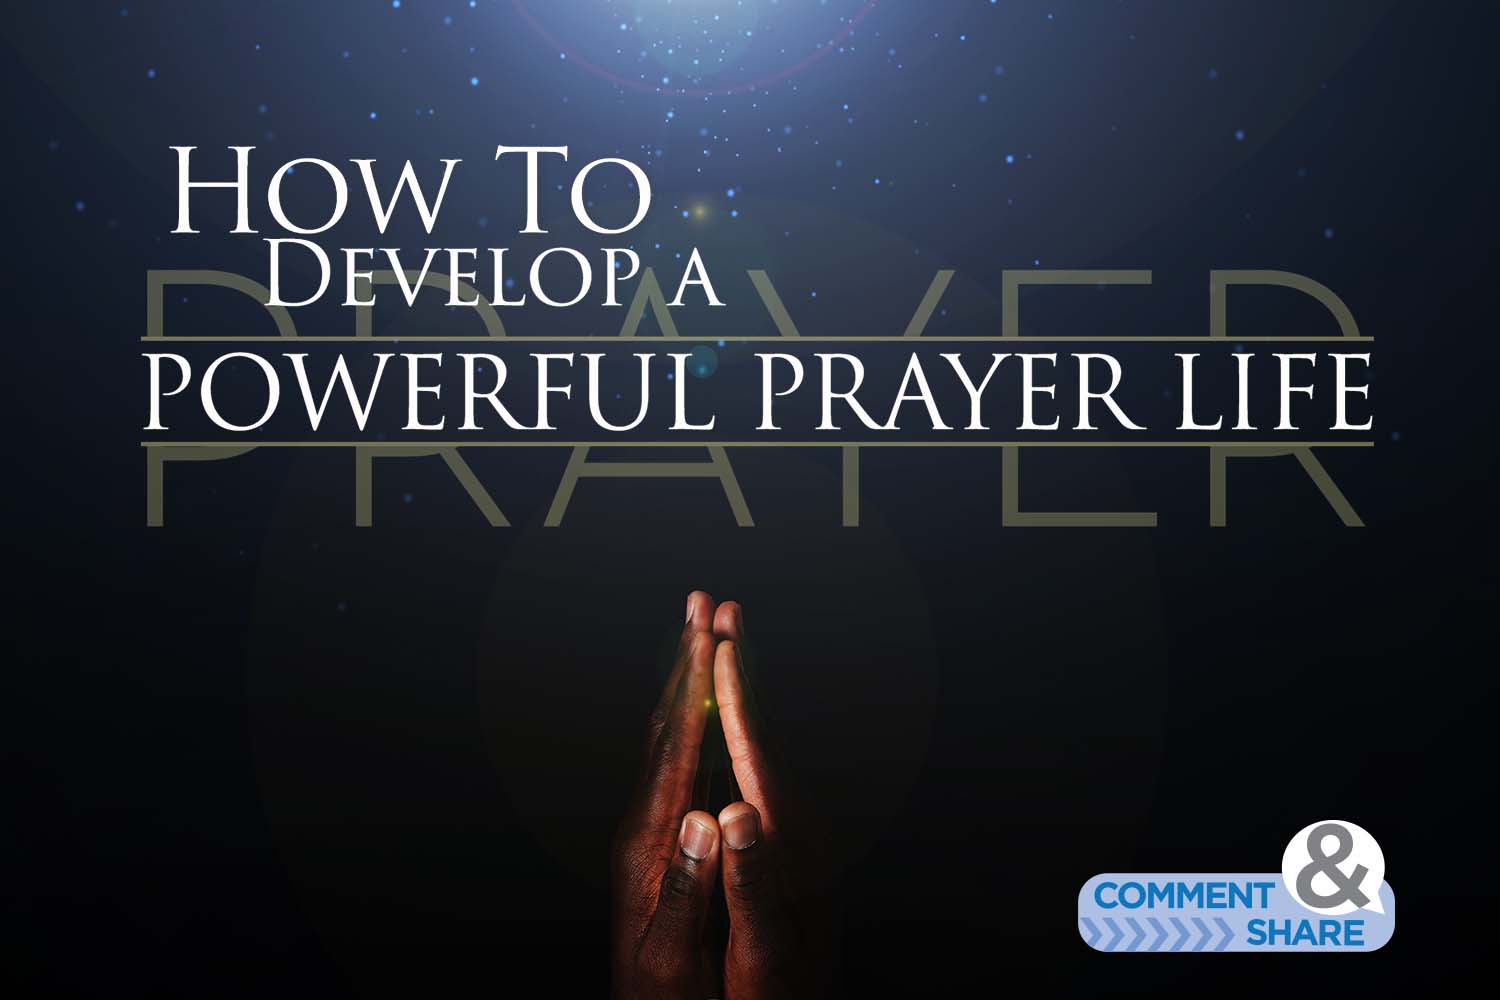 How To Develop a Powerful Prayer Life